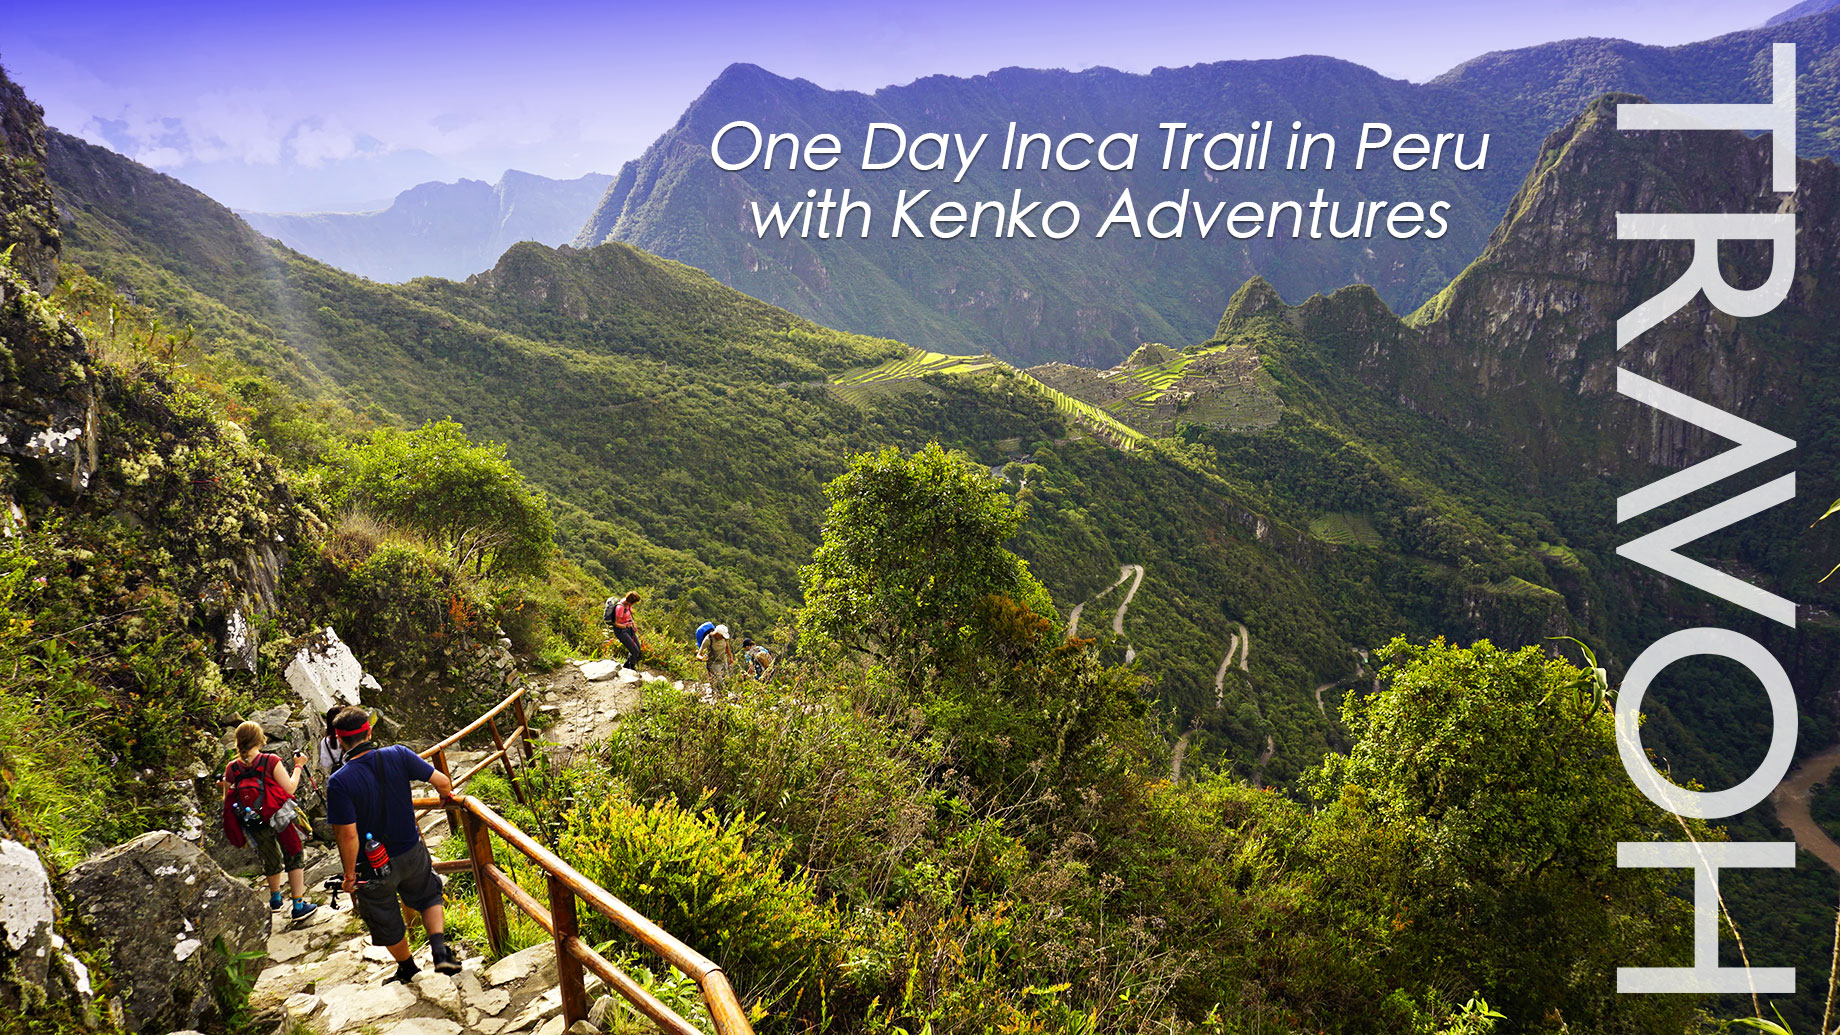 One Day Inca Trail in Peru with Kenko Adventures